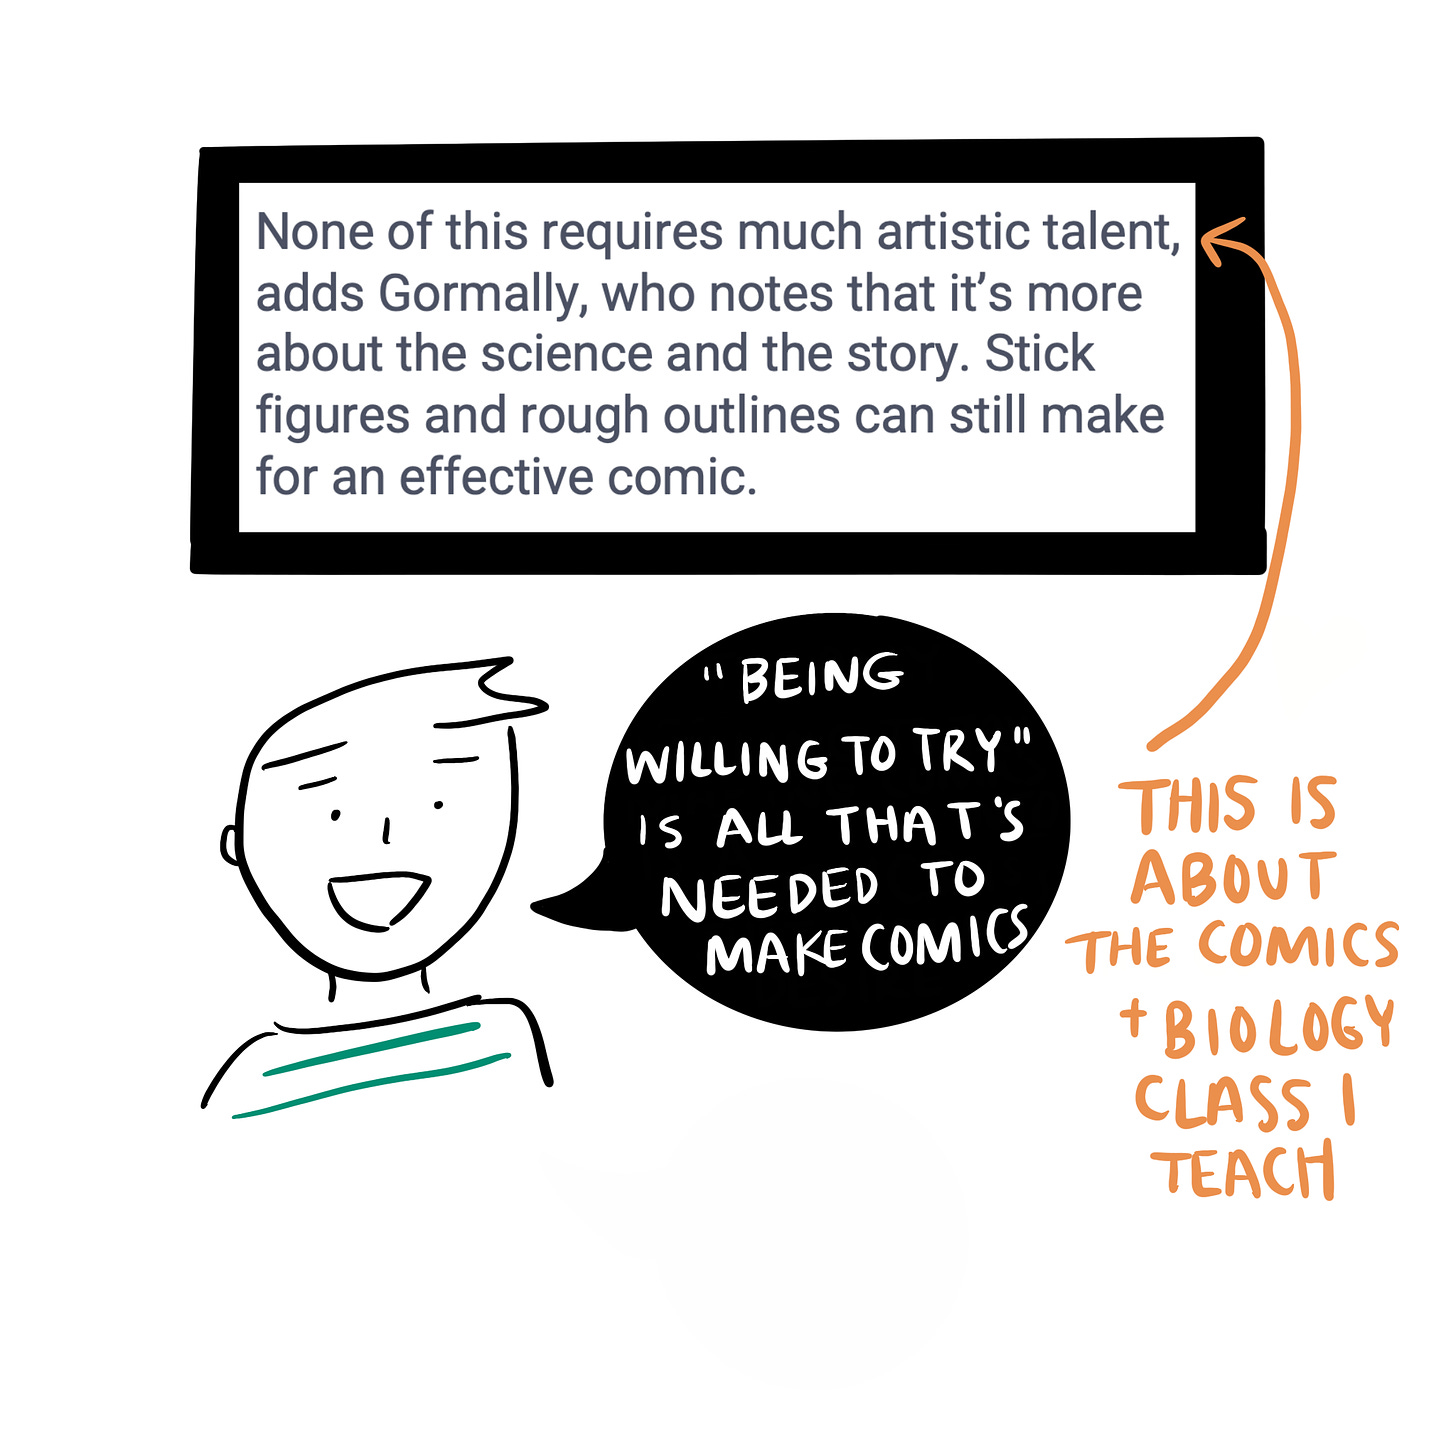 None of this requires much artistic talent, adds Gormally, who notes that it’s more about the science and the story. Stick figures and rough outlines can still make for an effective comic. Cartoonist: “being willing to try” is all that’s needed to make comics.  